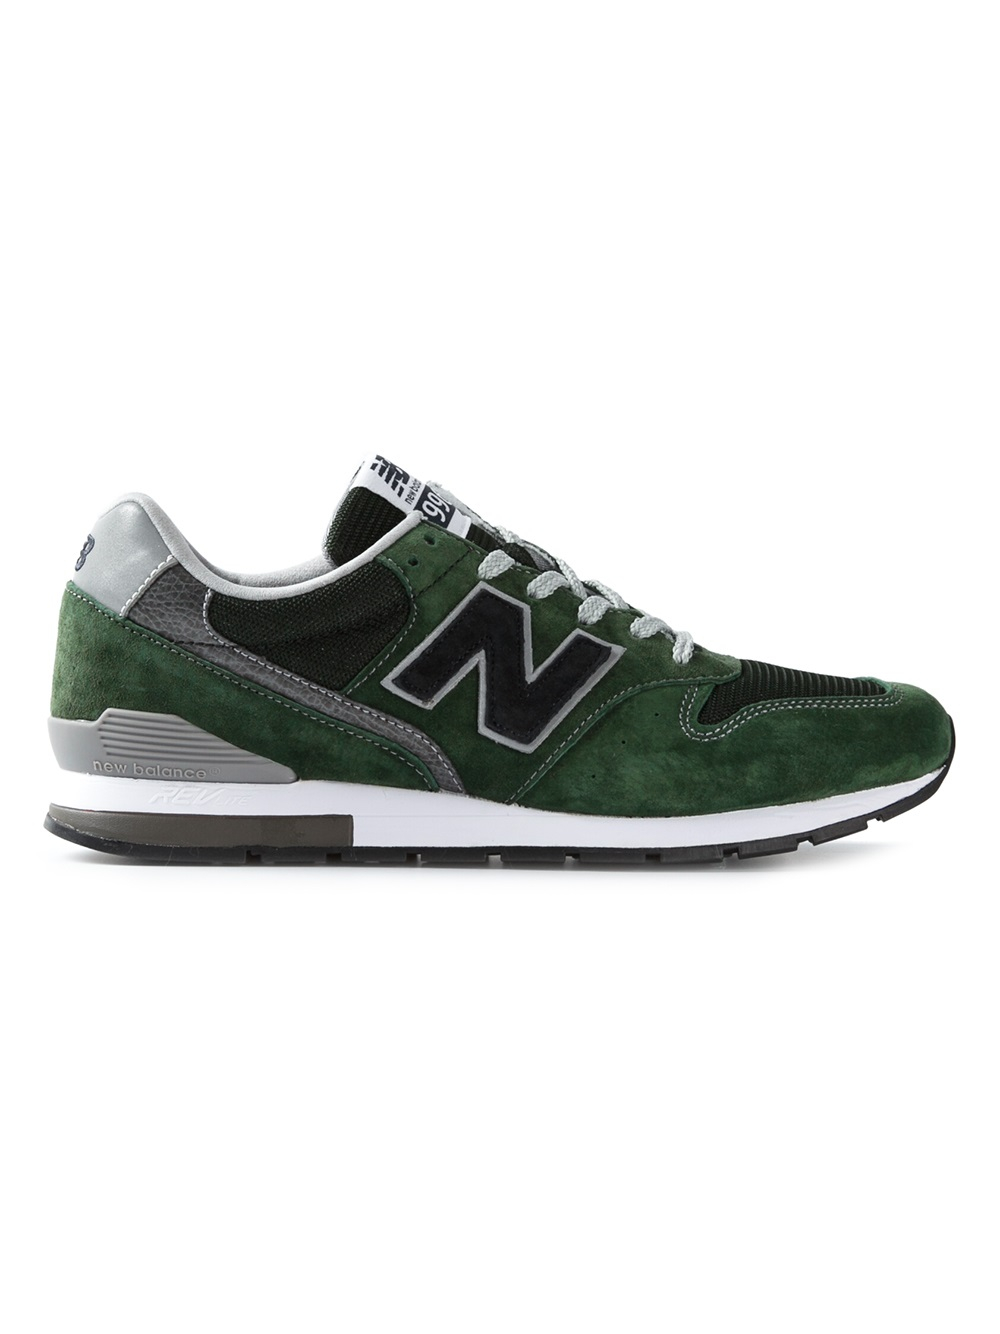 New Balance 996 Trainer in Green for 